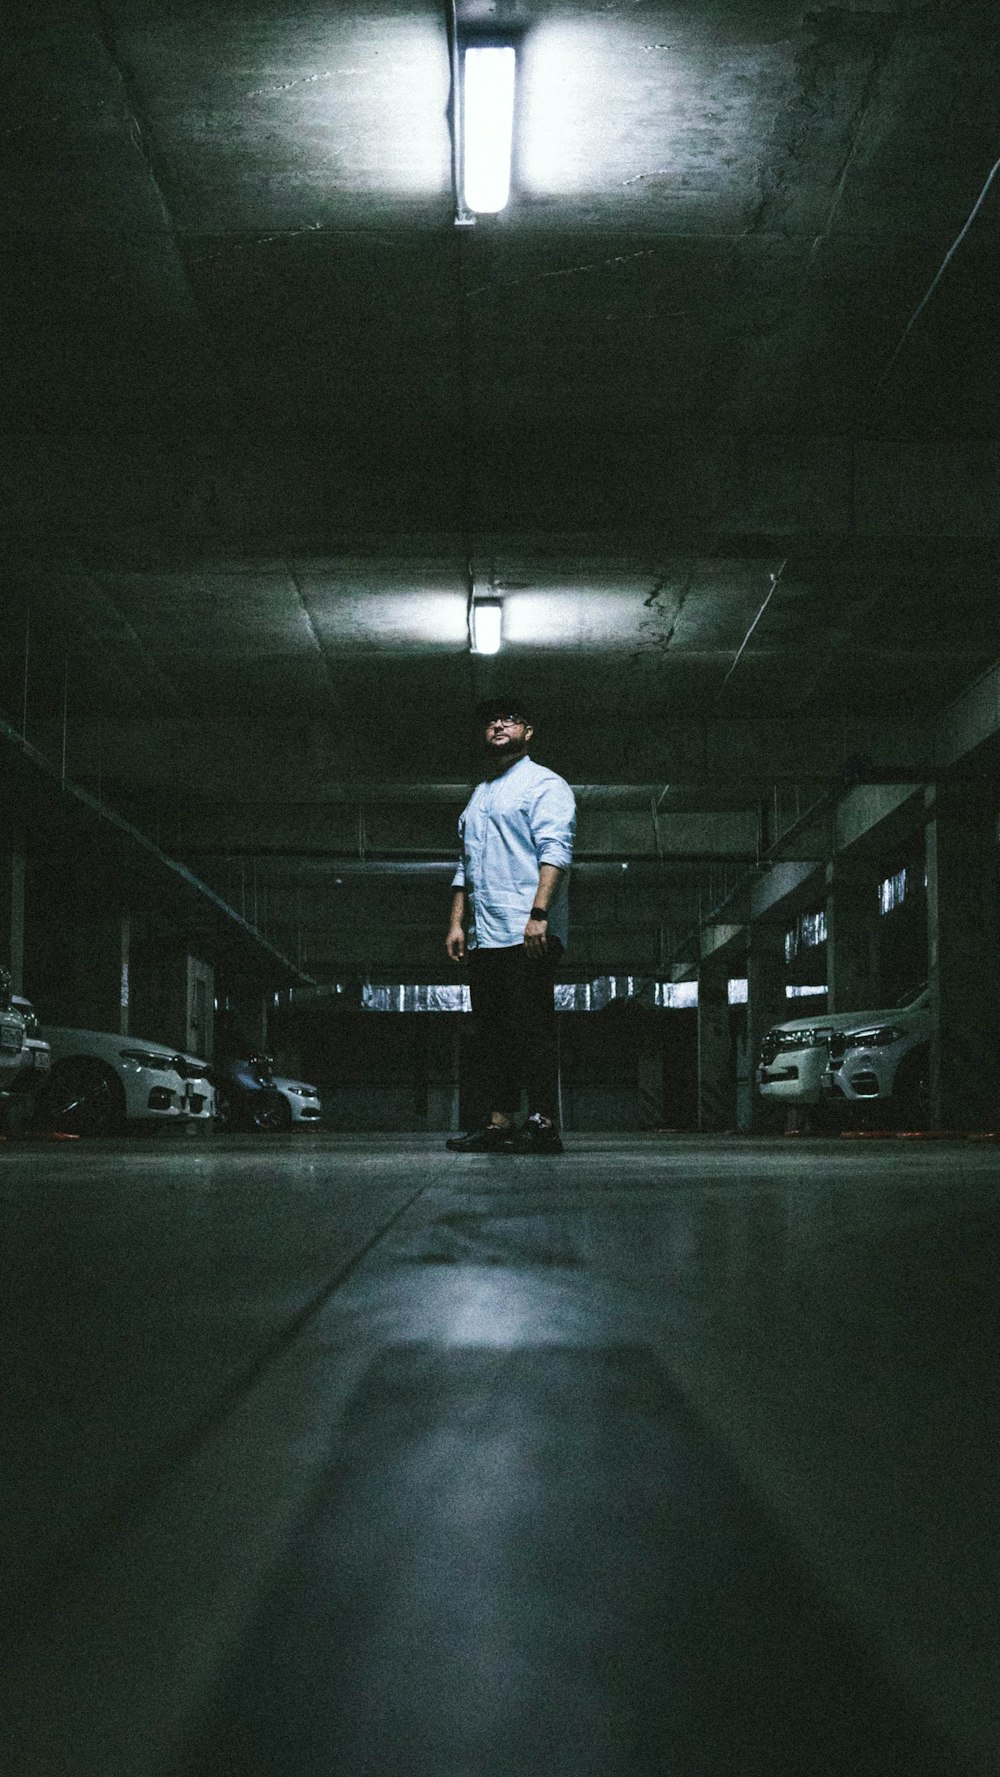 a man standing in a parking garage with a suitcase